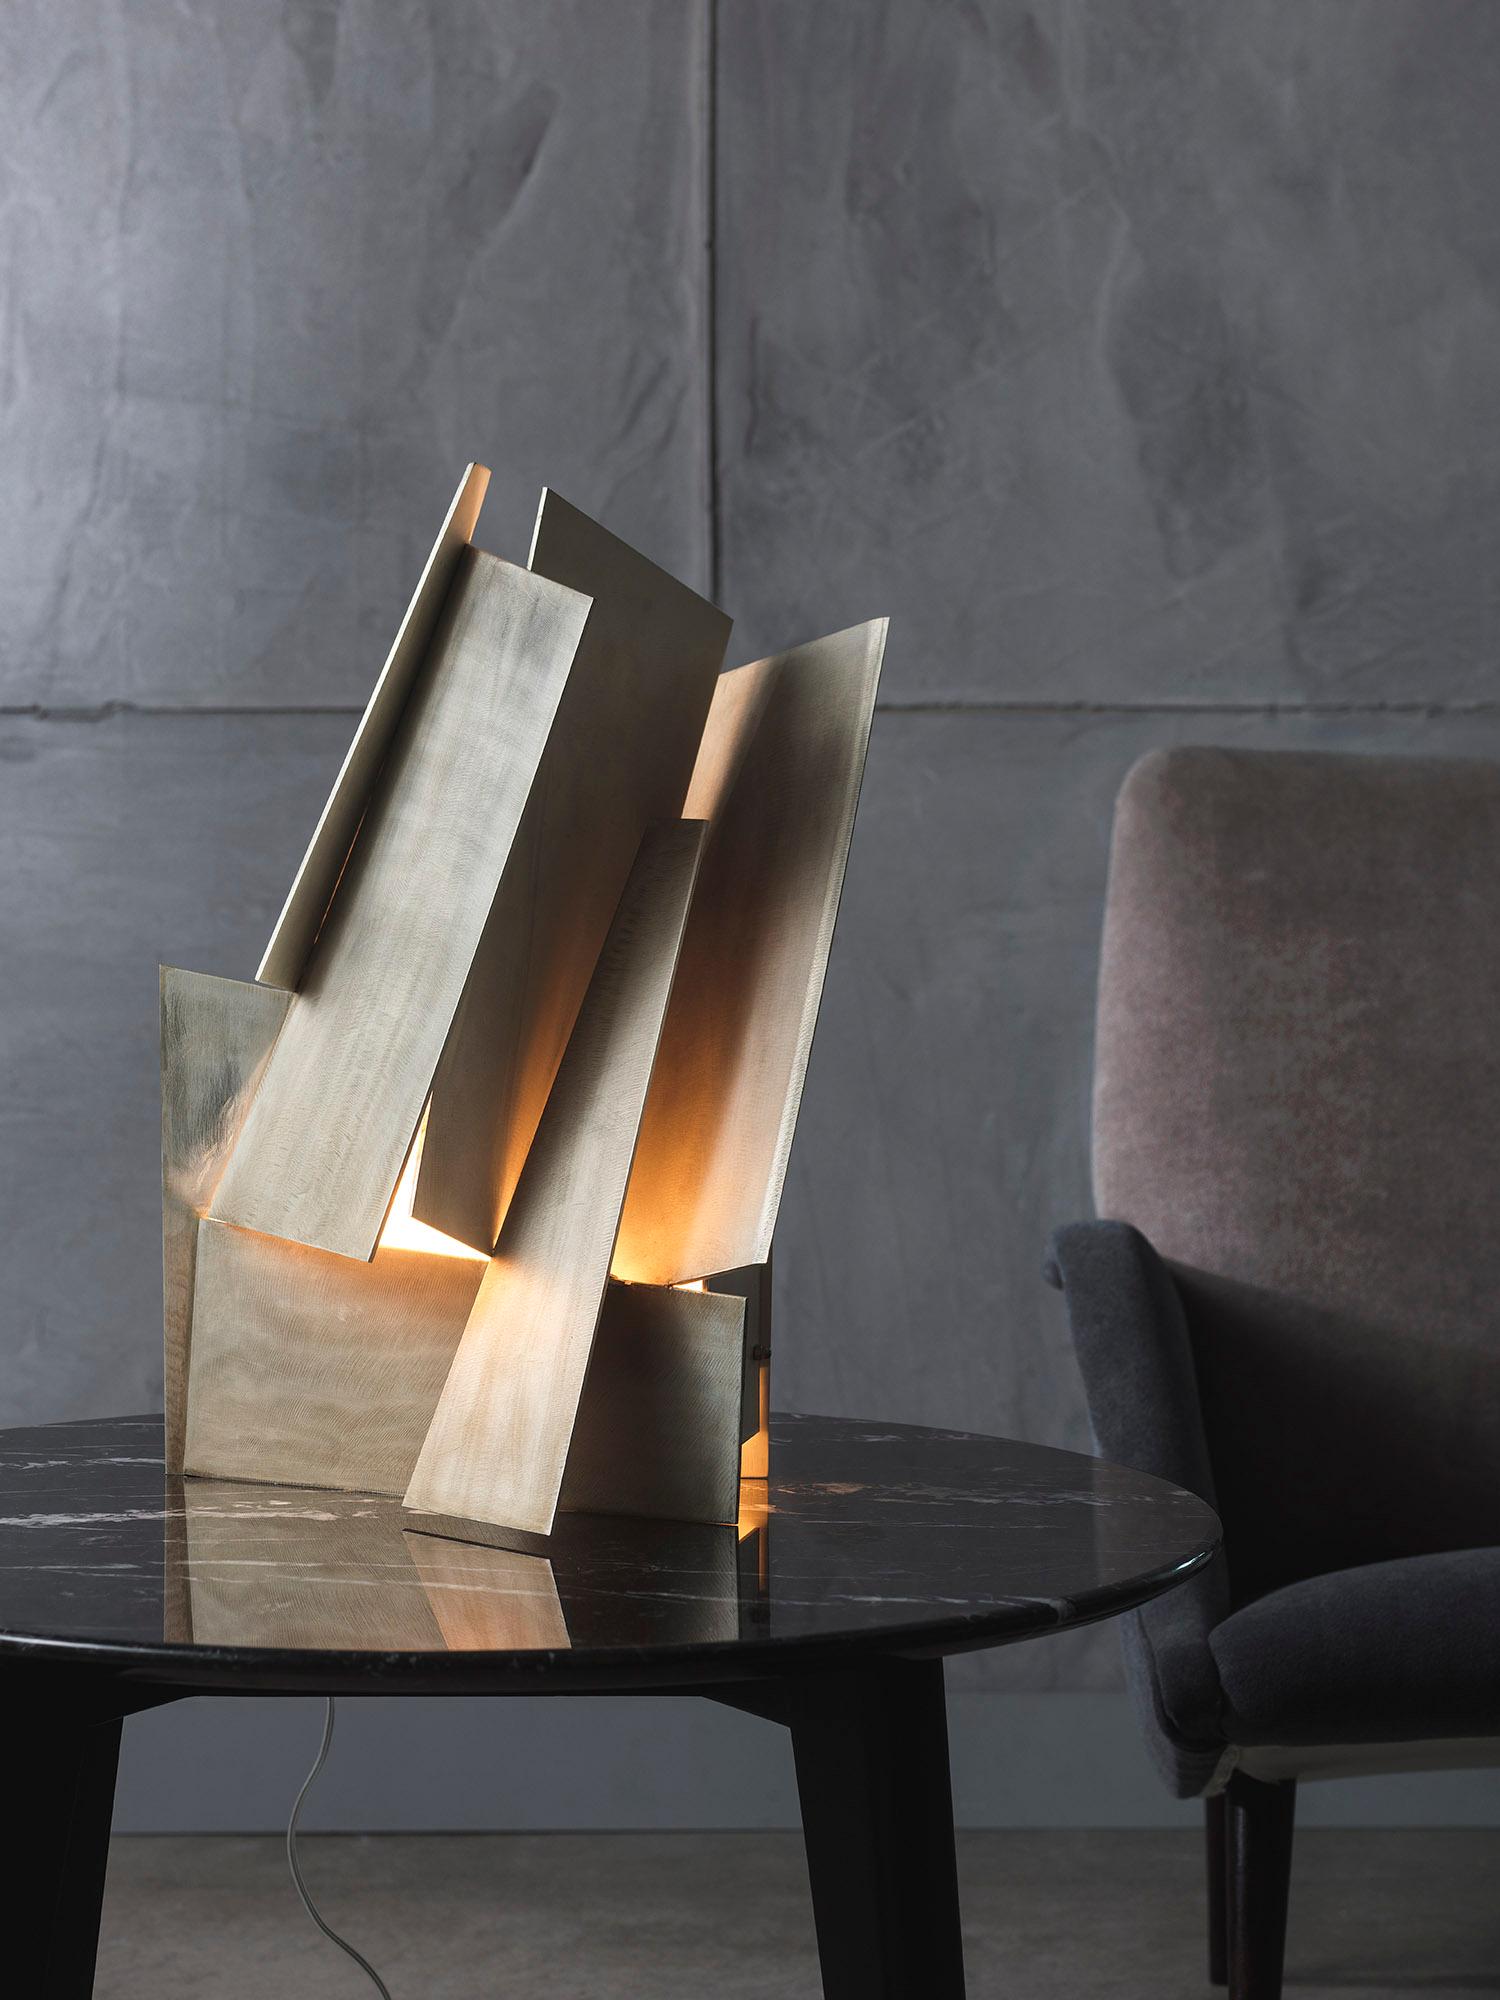 Brushed brass table lamp in brushed silver finish.